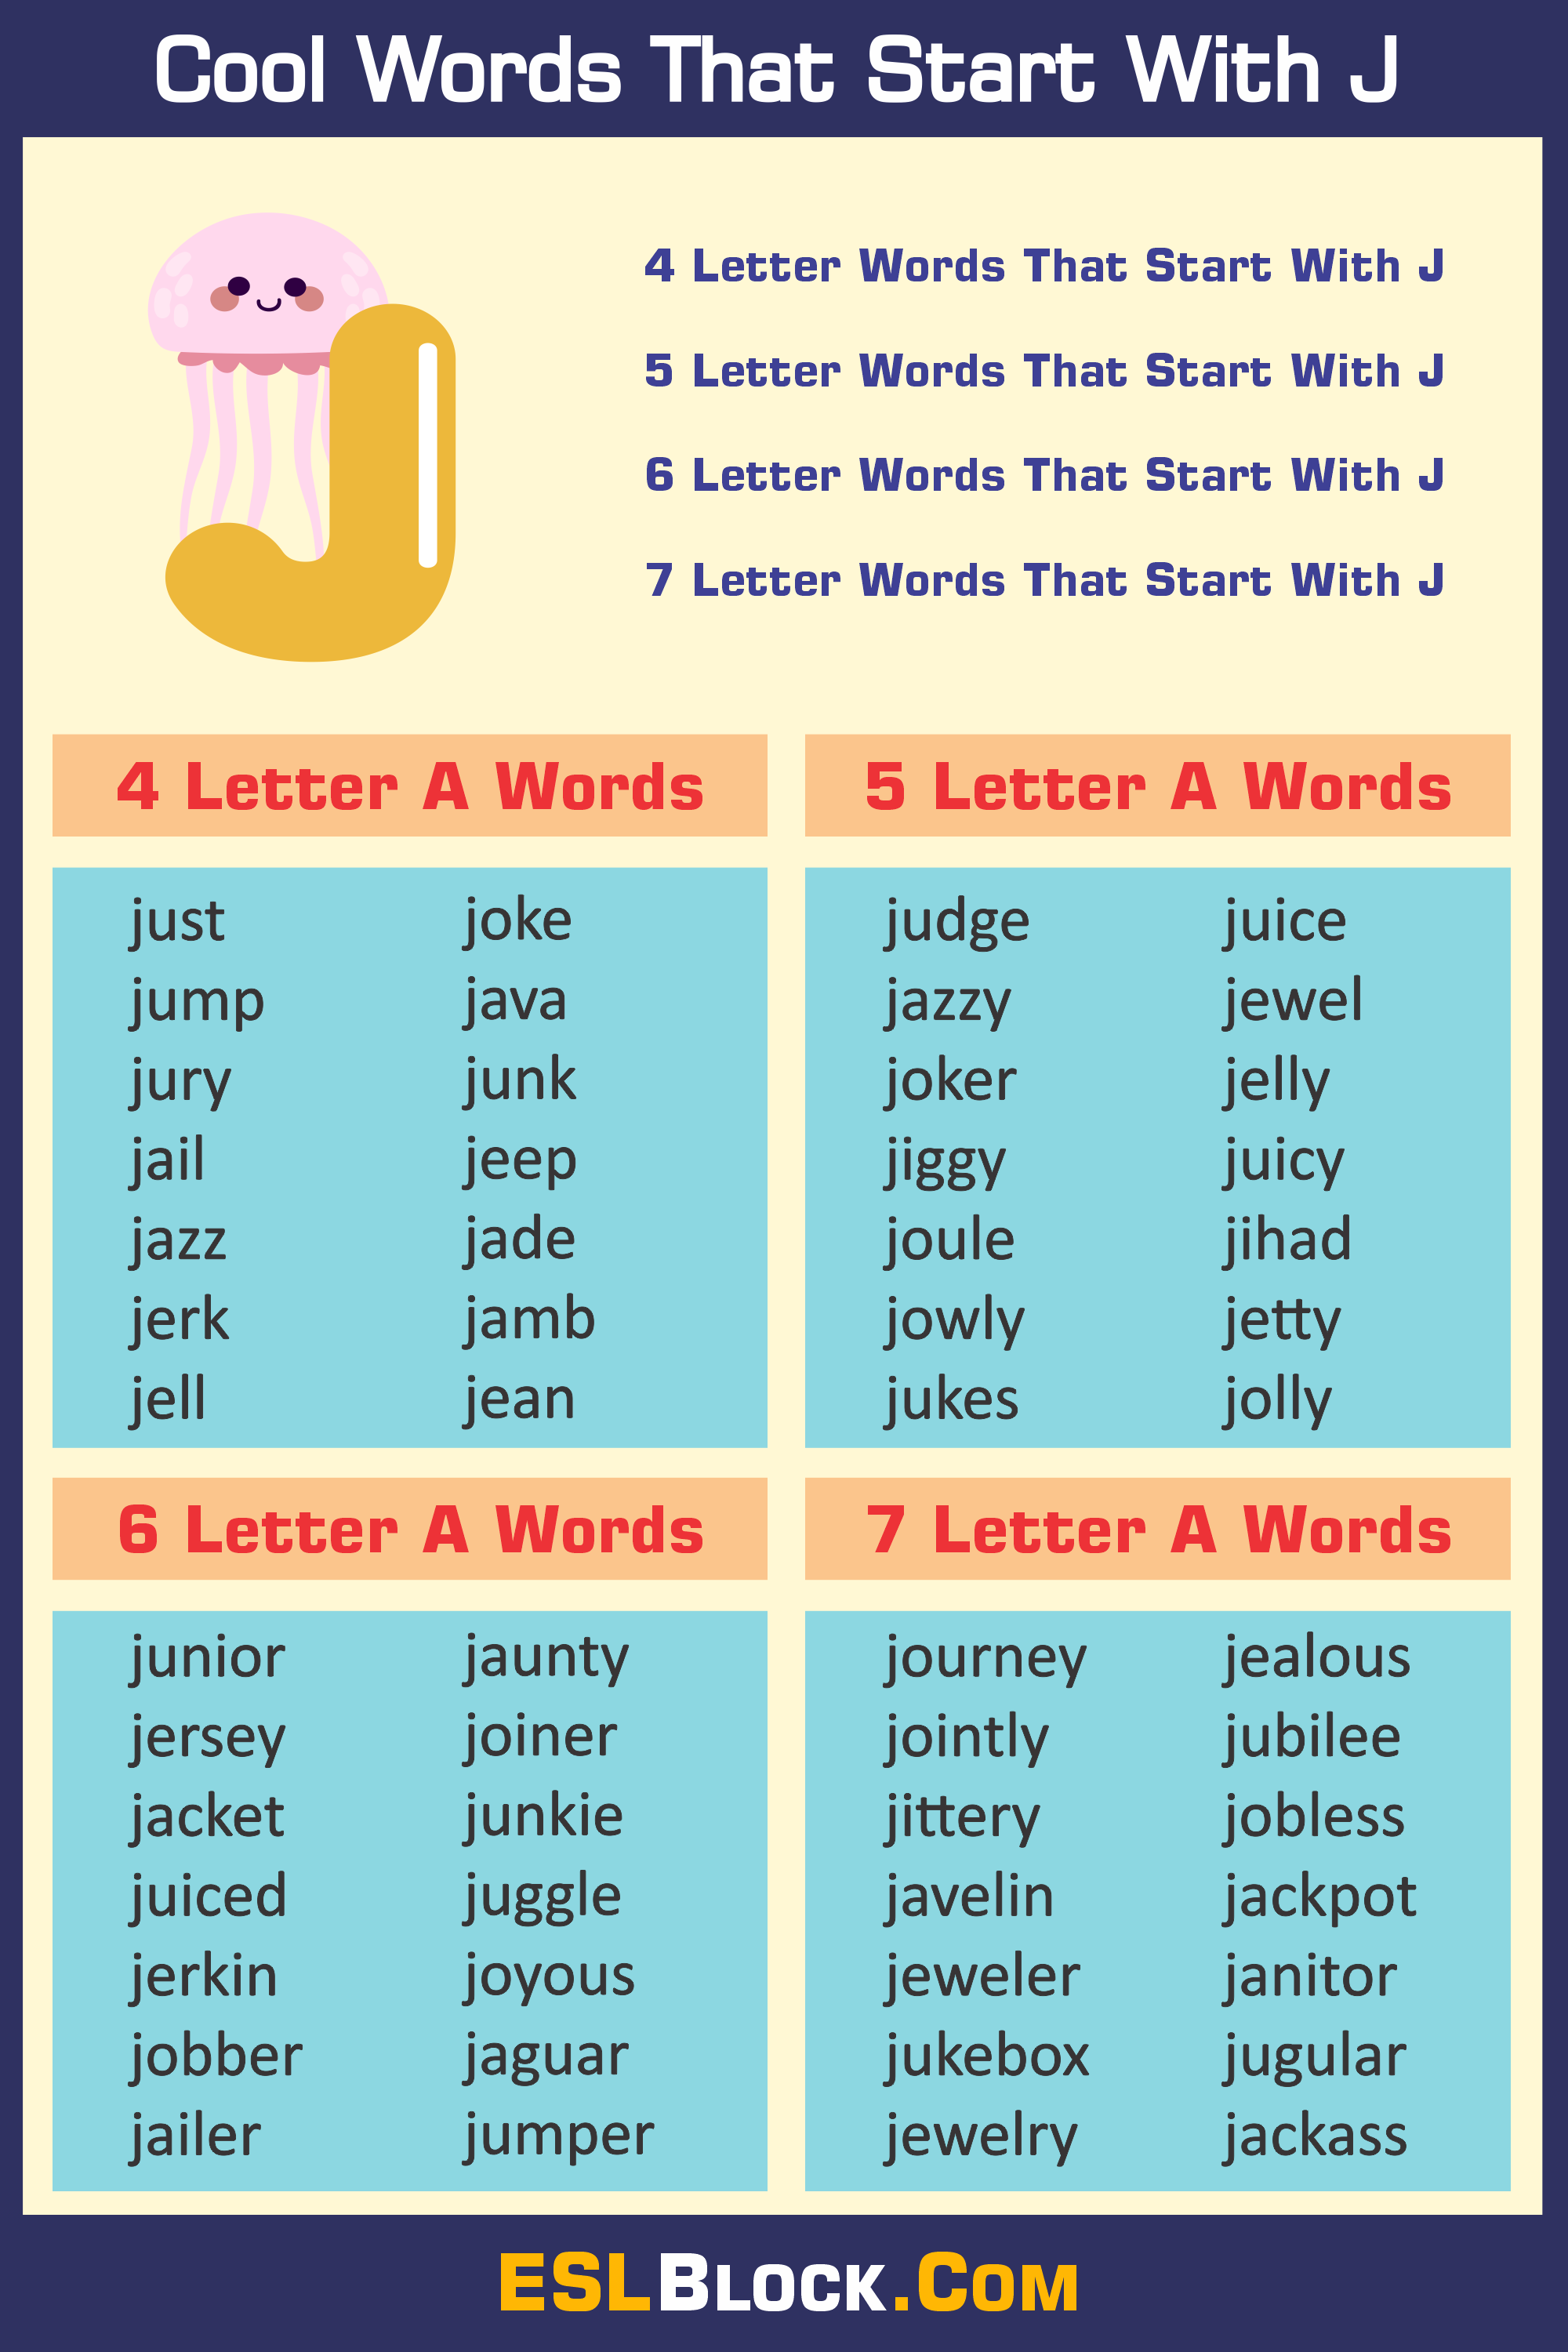 4 Letter Words, 4 Letter Words That Start With J, 5 Letter Words, 5 Letter Words That Start With J, 6 Letter Words, 6 Letter Words That Start With J, 7 Letter Words, 7 Letter Words That Start With J, Awesome Cool Words, Christmas Words That Start With J, Cool Words, Describing Words That Start With J, Descriptive Words That Start With J, English Words, Five Letter Words Starting with J, Good Words That Start With J, J Words, Nice Words That Start With J, Positive Words That Start With J, Unique Words, Word Dictionary, Words That Start With J, Words That Start With J to Describe Someone